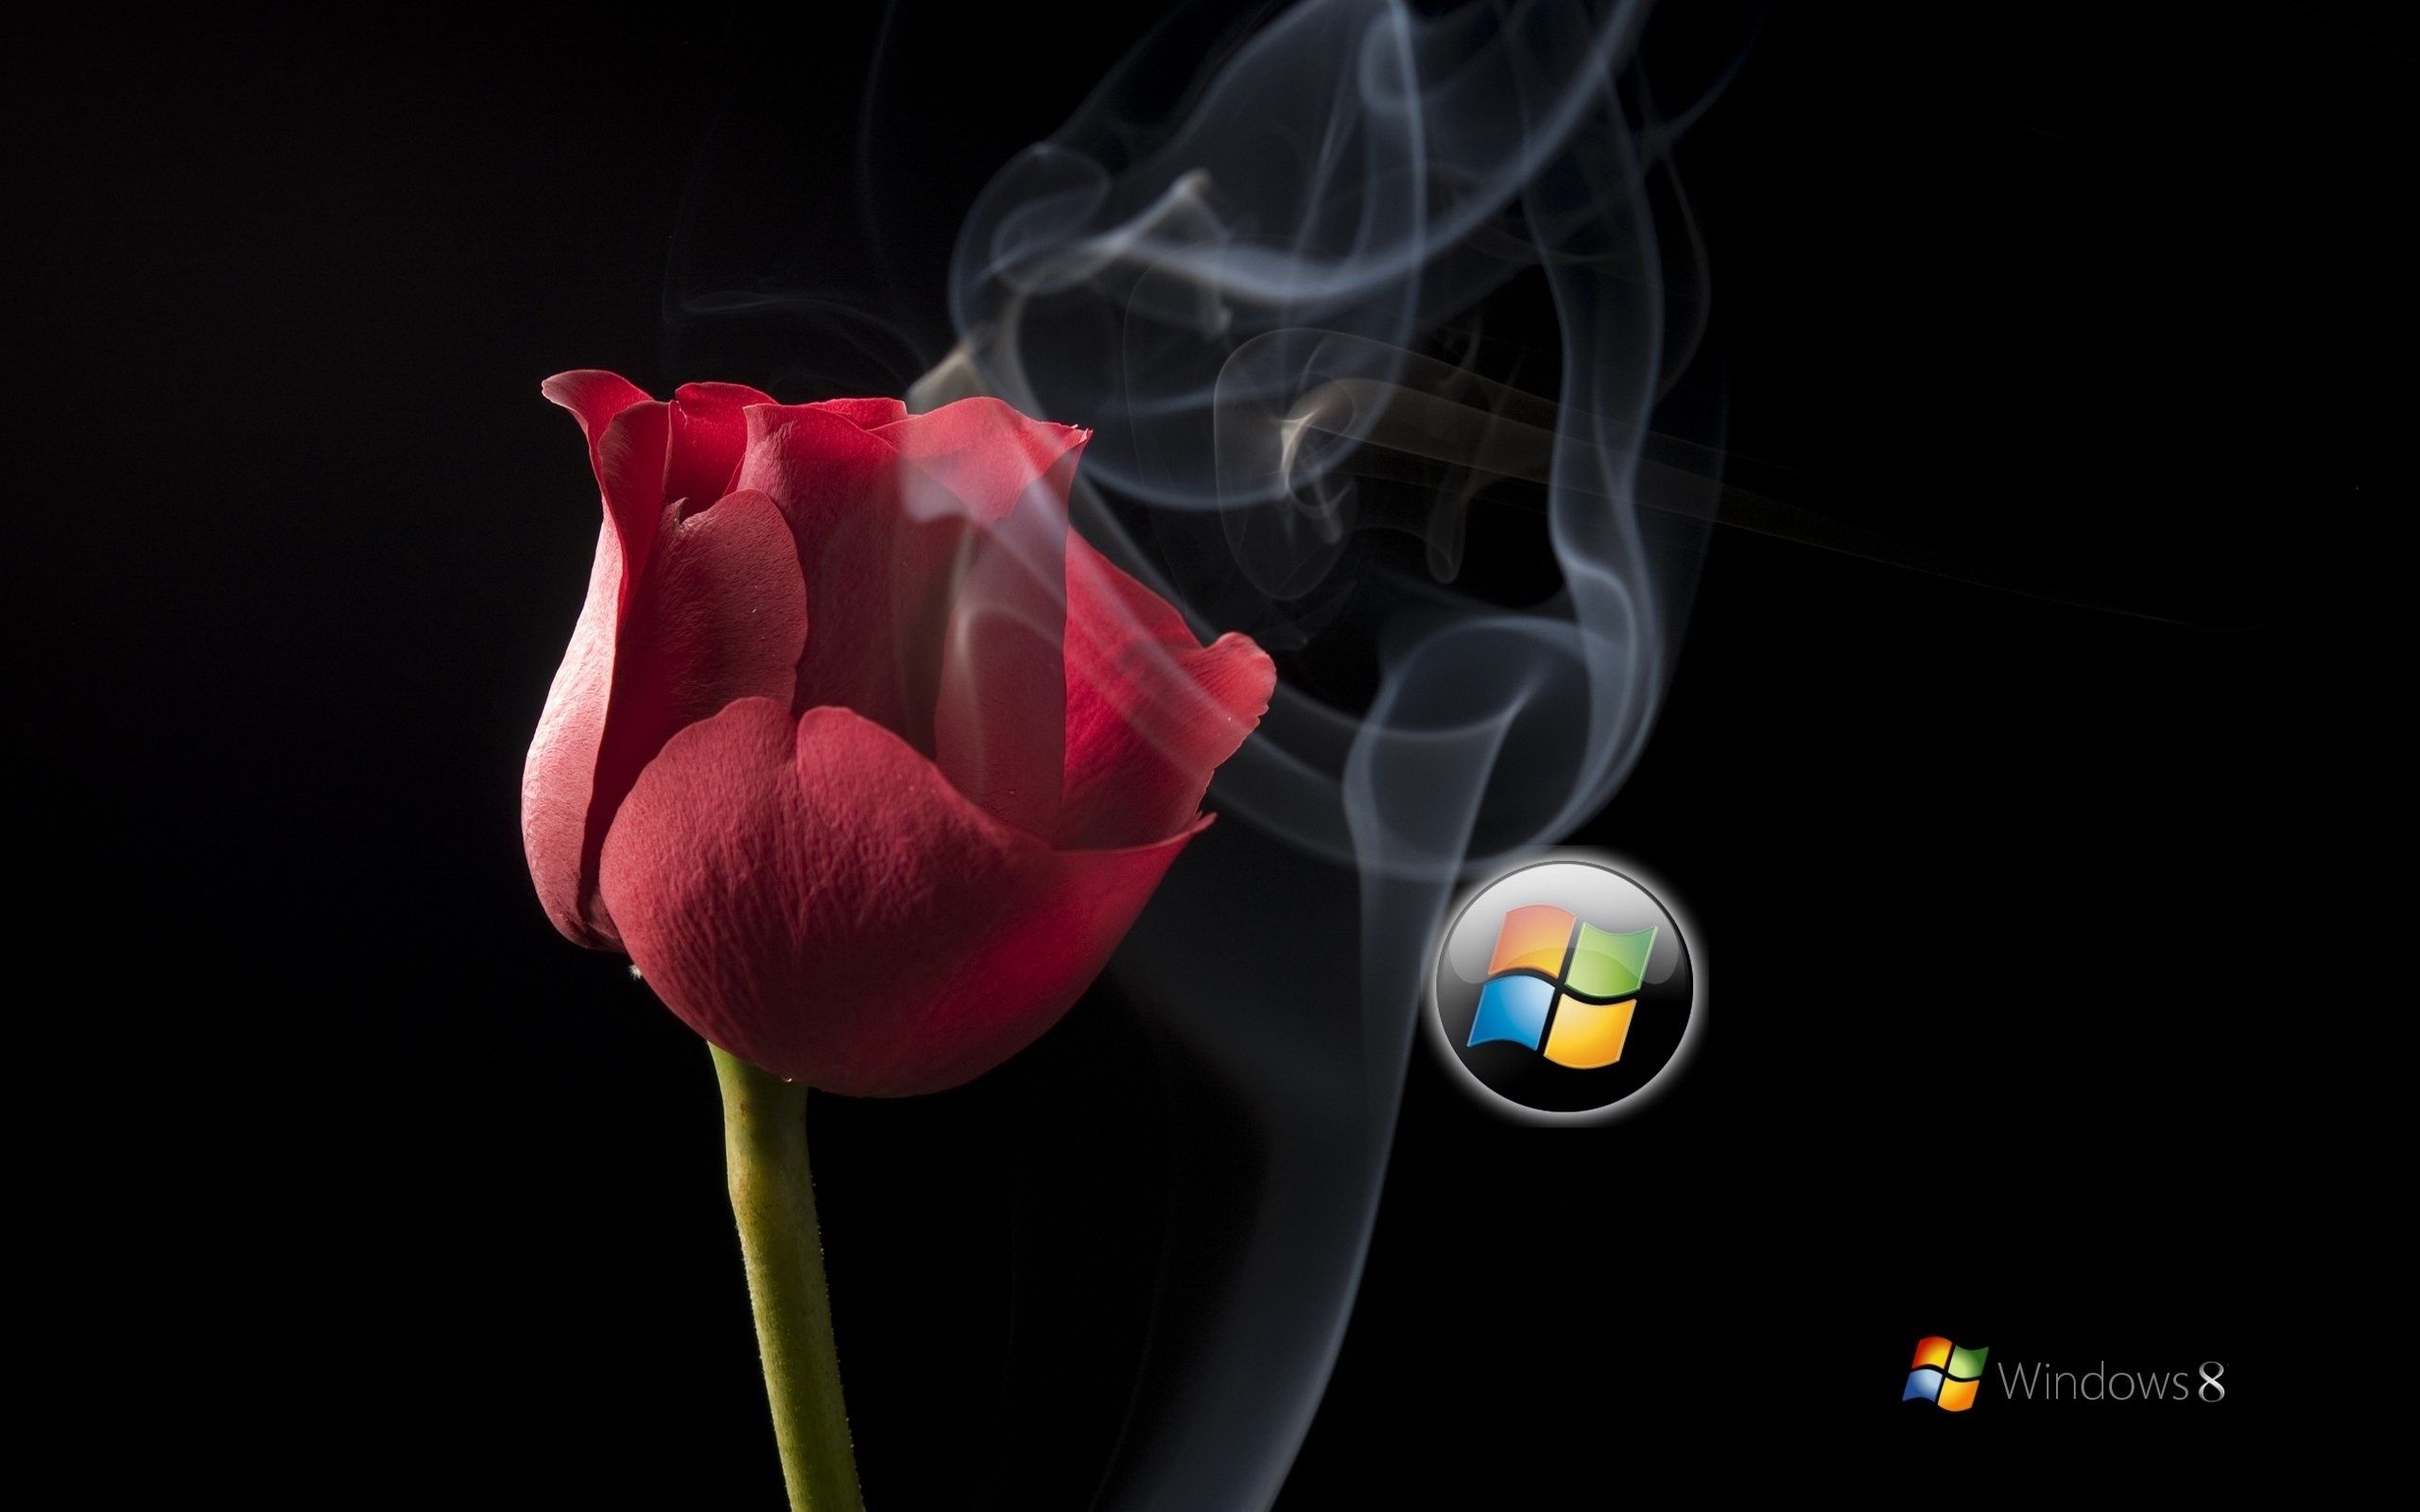 Windows 8 hd wallpapers free download ~ you are important